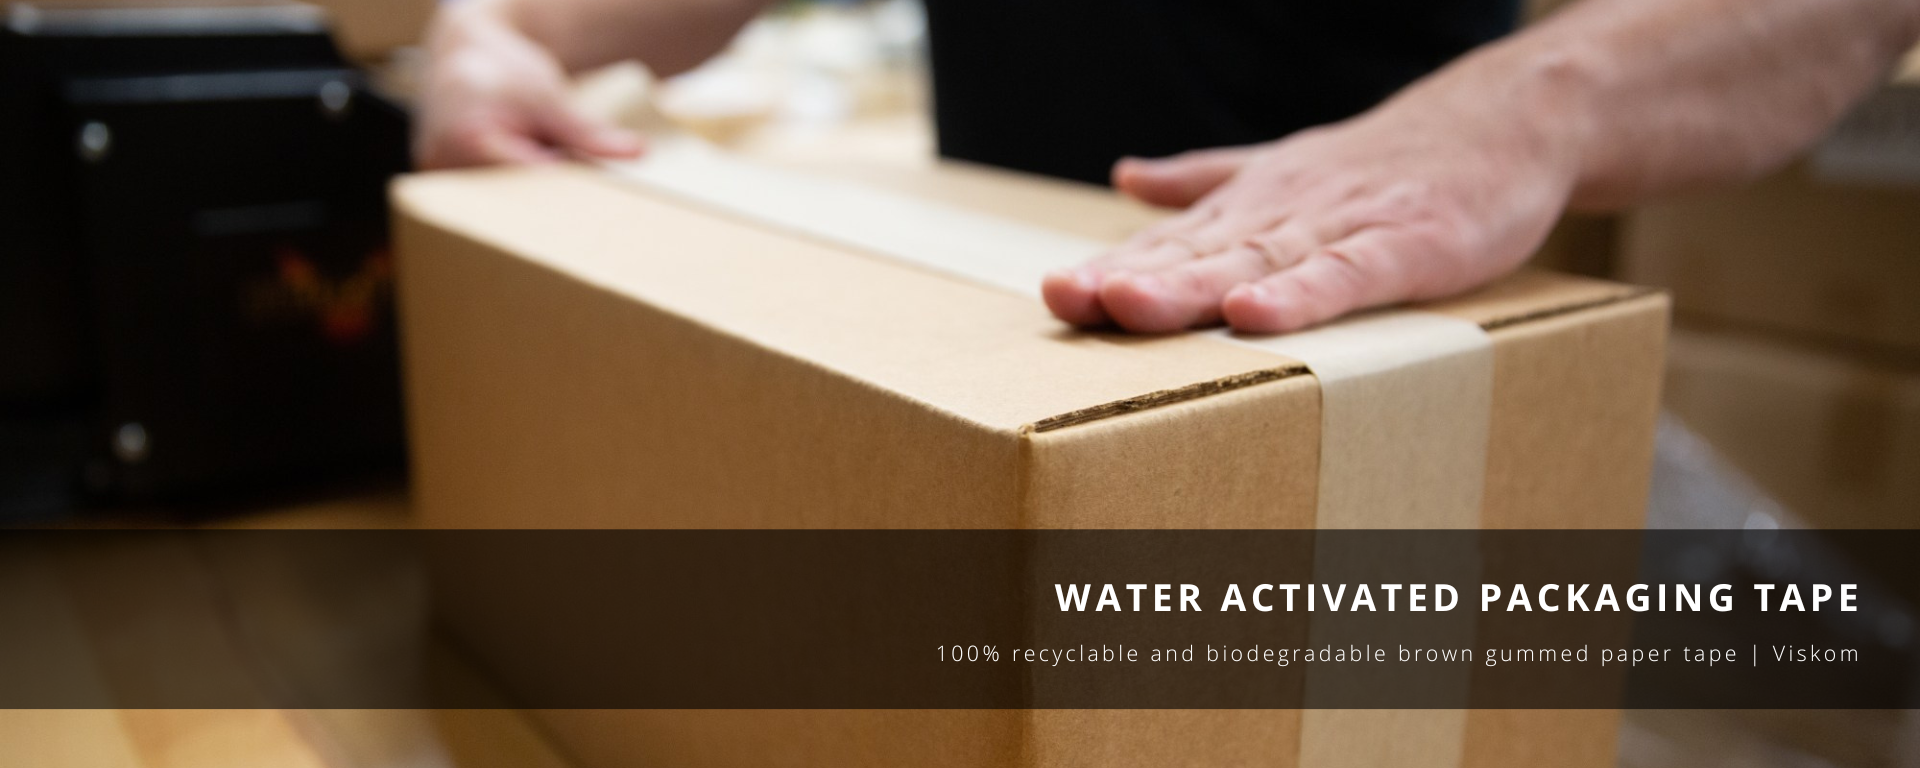 Water activated packaging tape